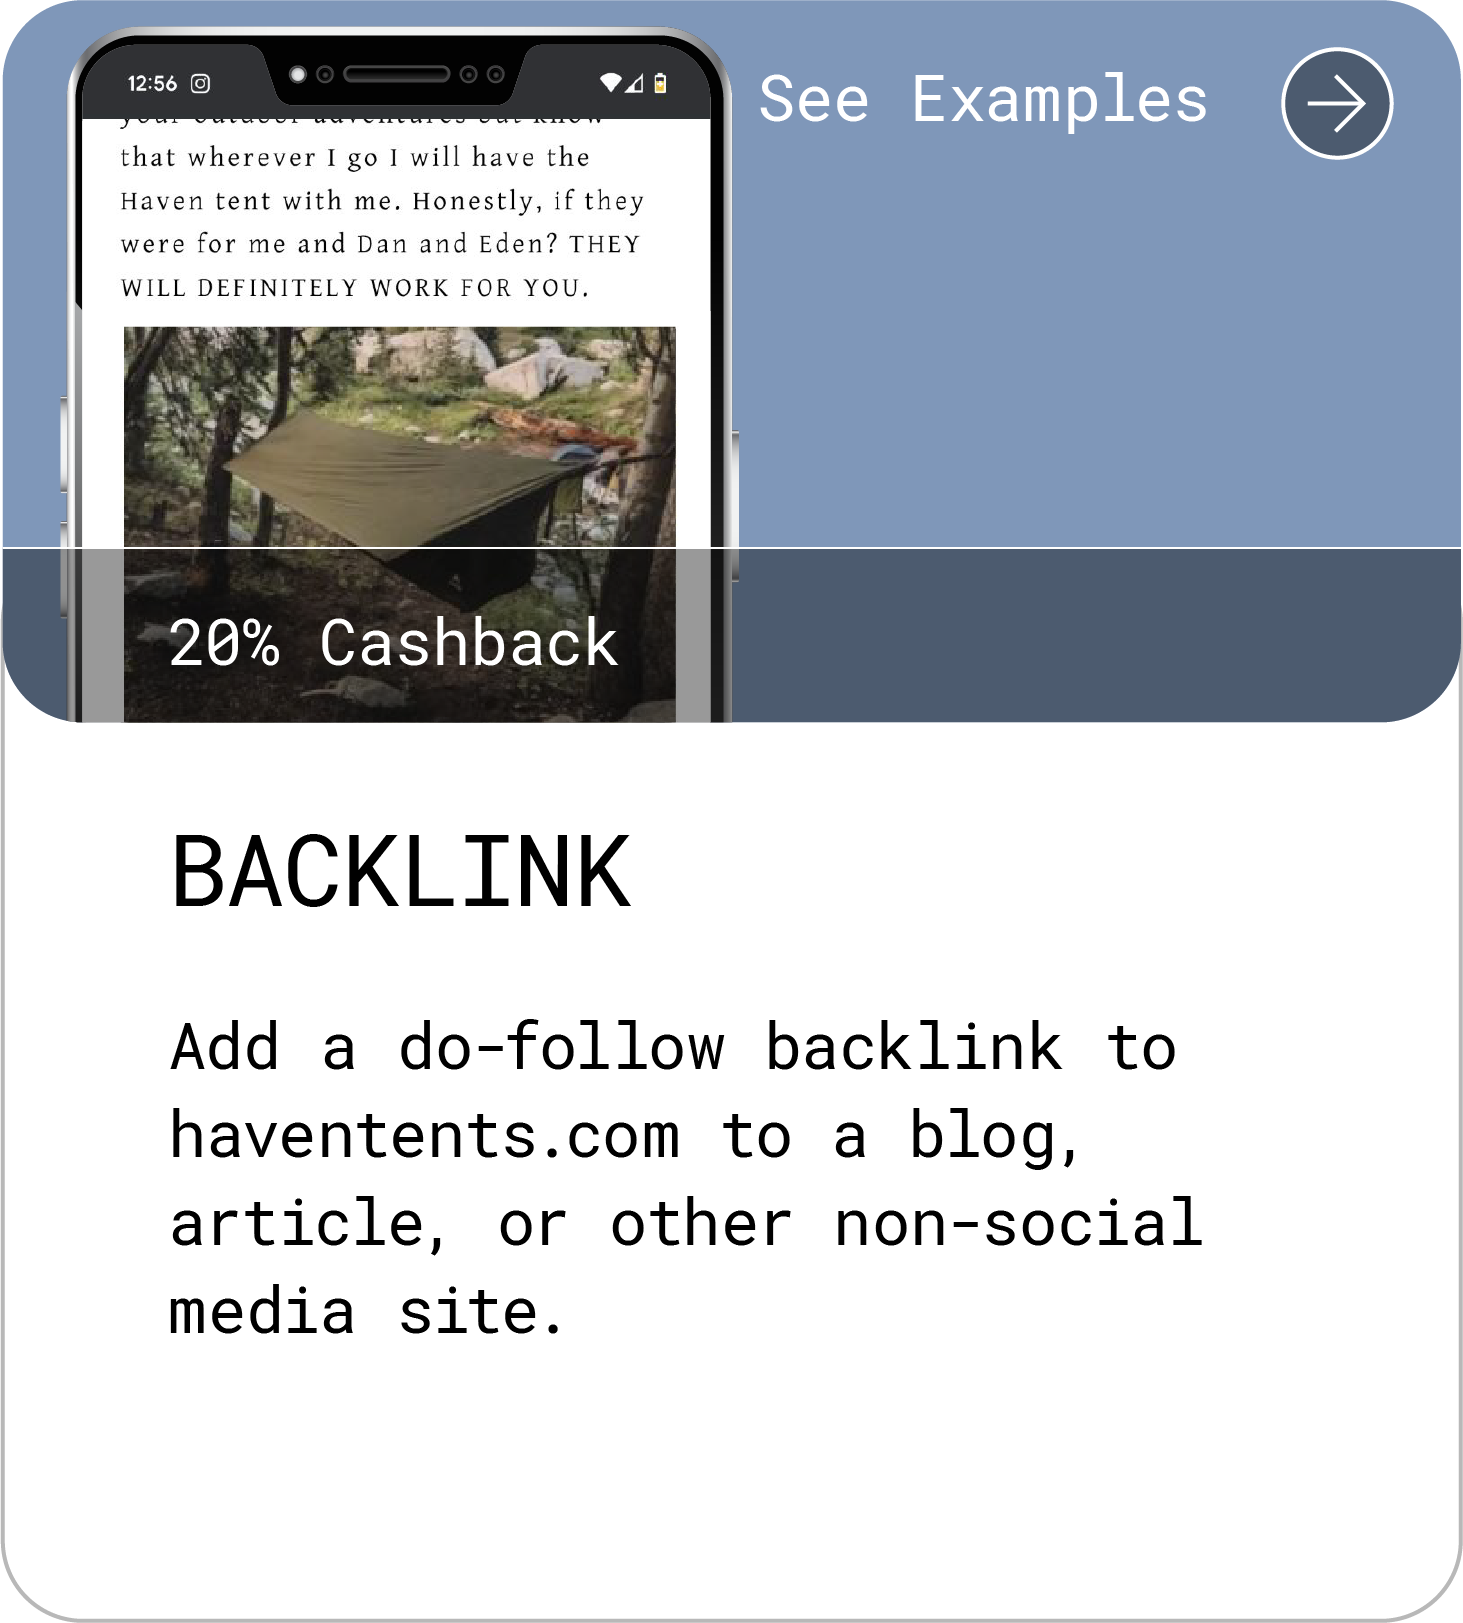 Add a do-follow backlink to haventents.com to a blog, article, or other non-social media site. See Examples